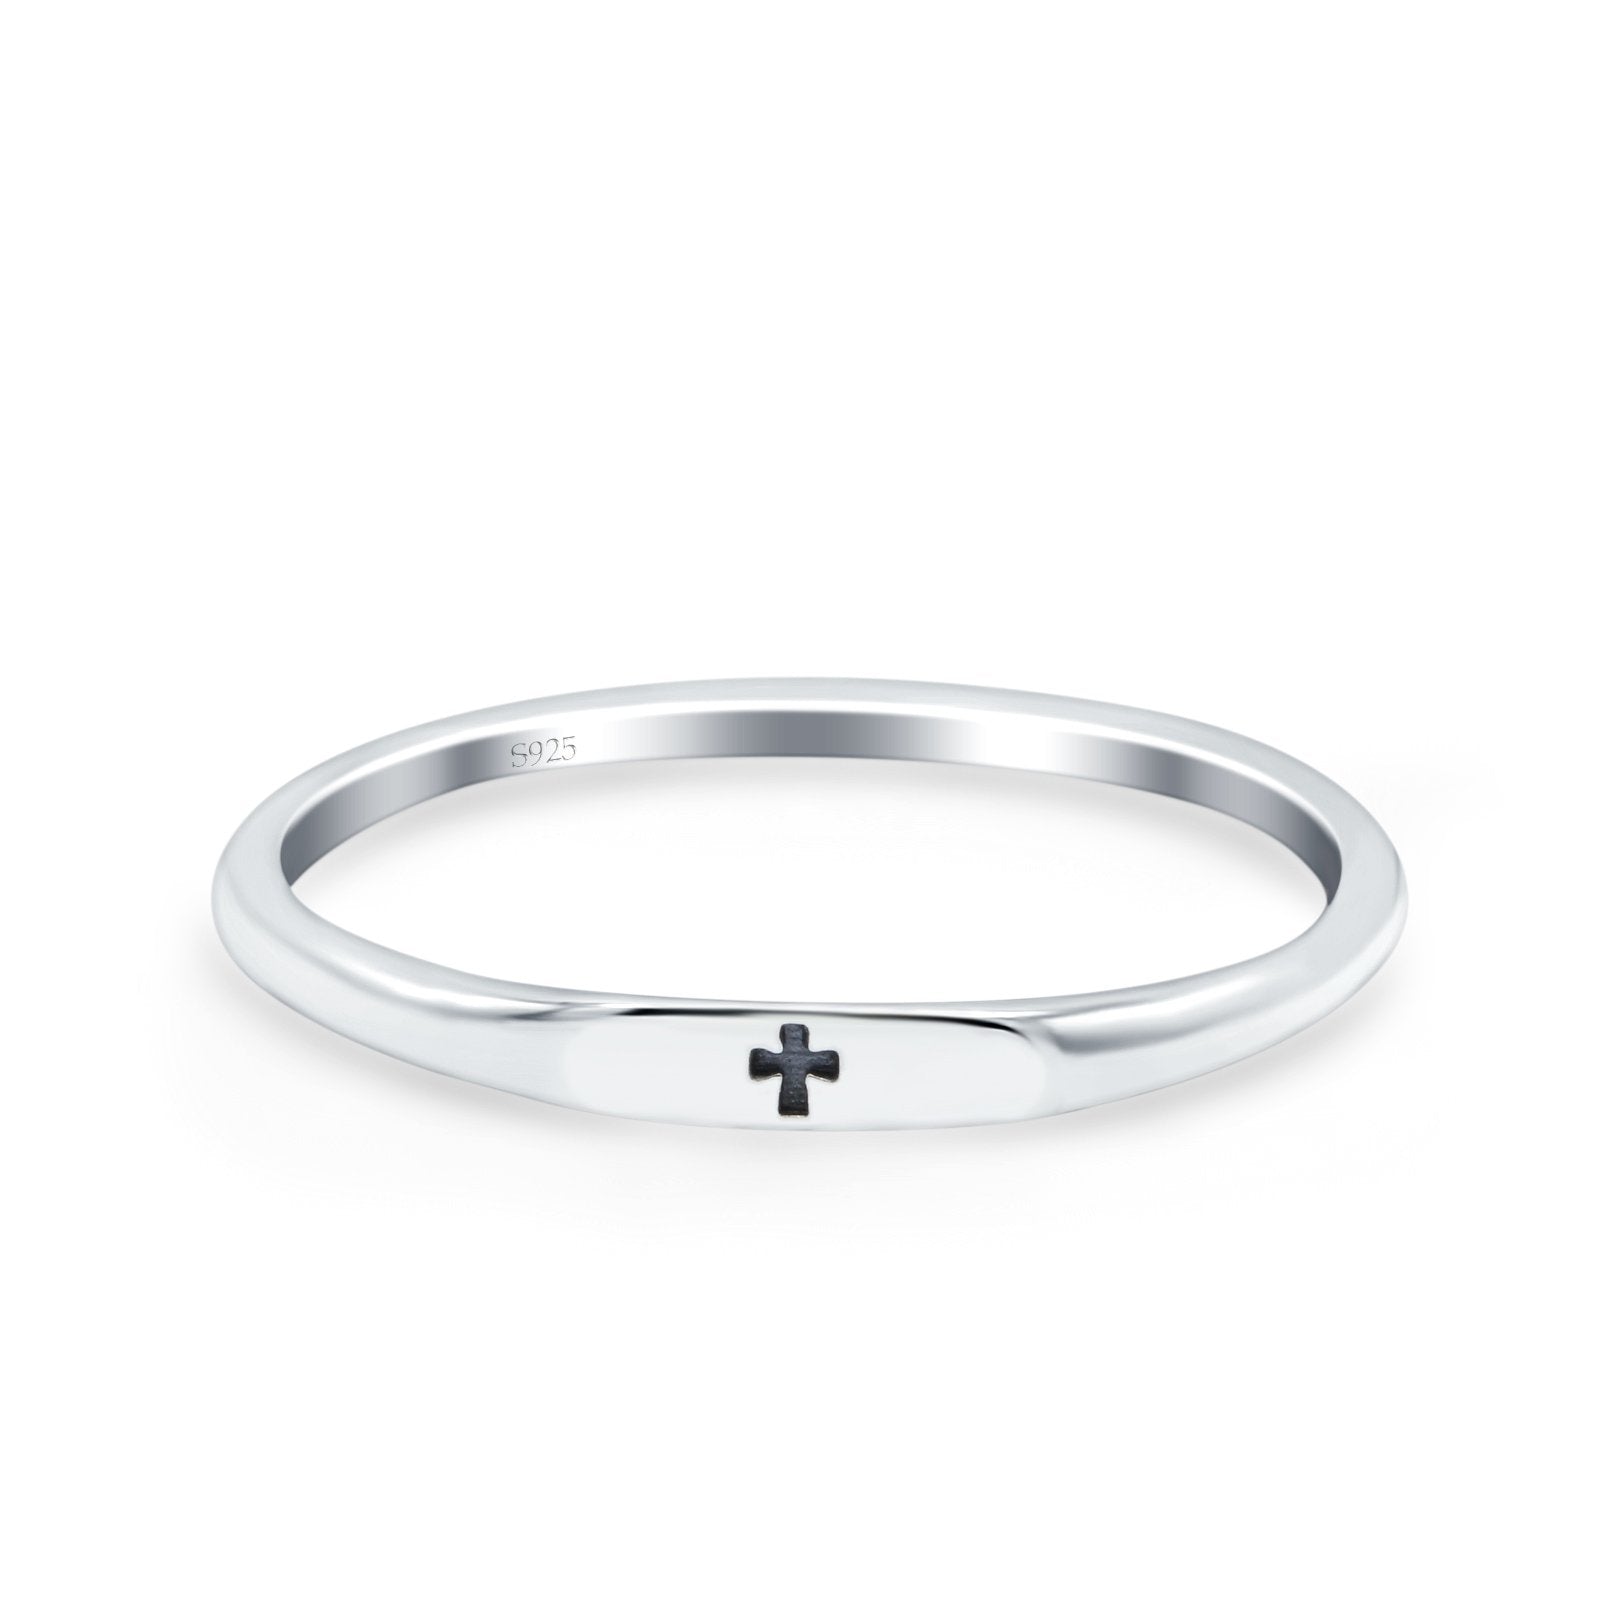 Small Cross Ring Oxidized Band Solid 925 Sterling Silver Thumb Ring (2.2mm)